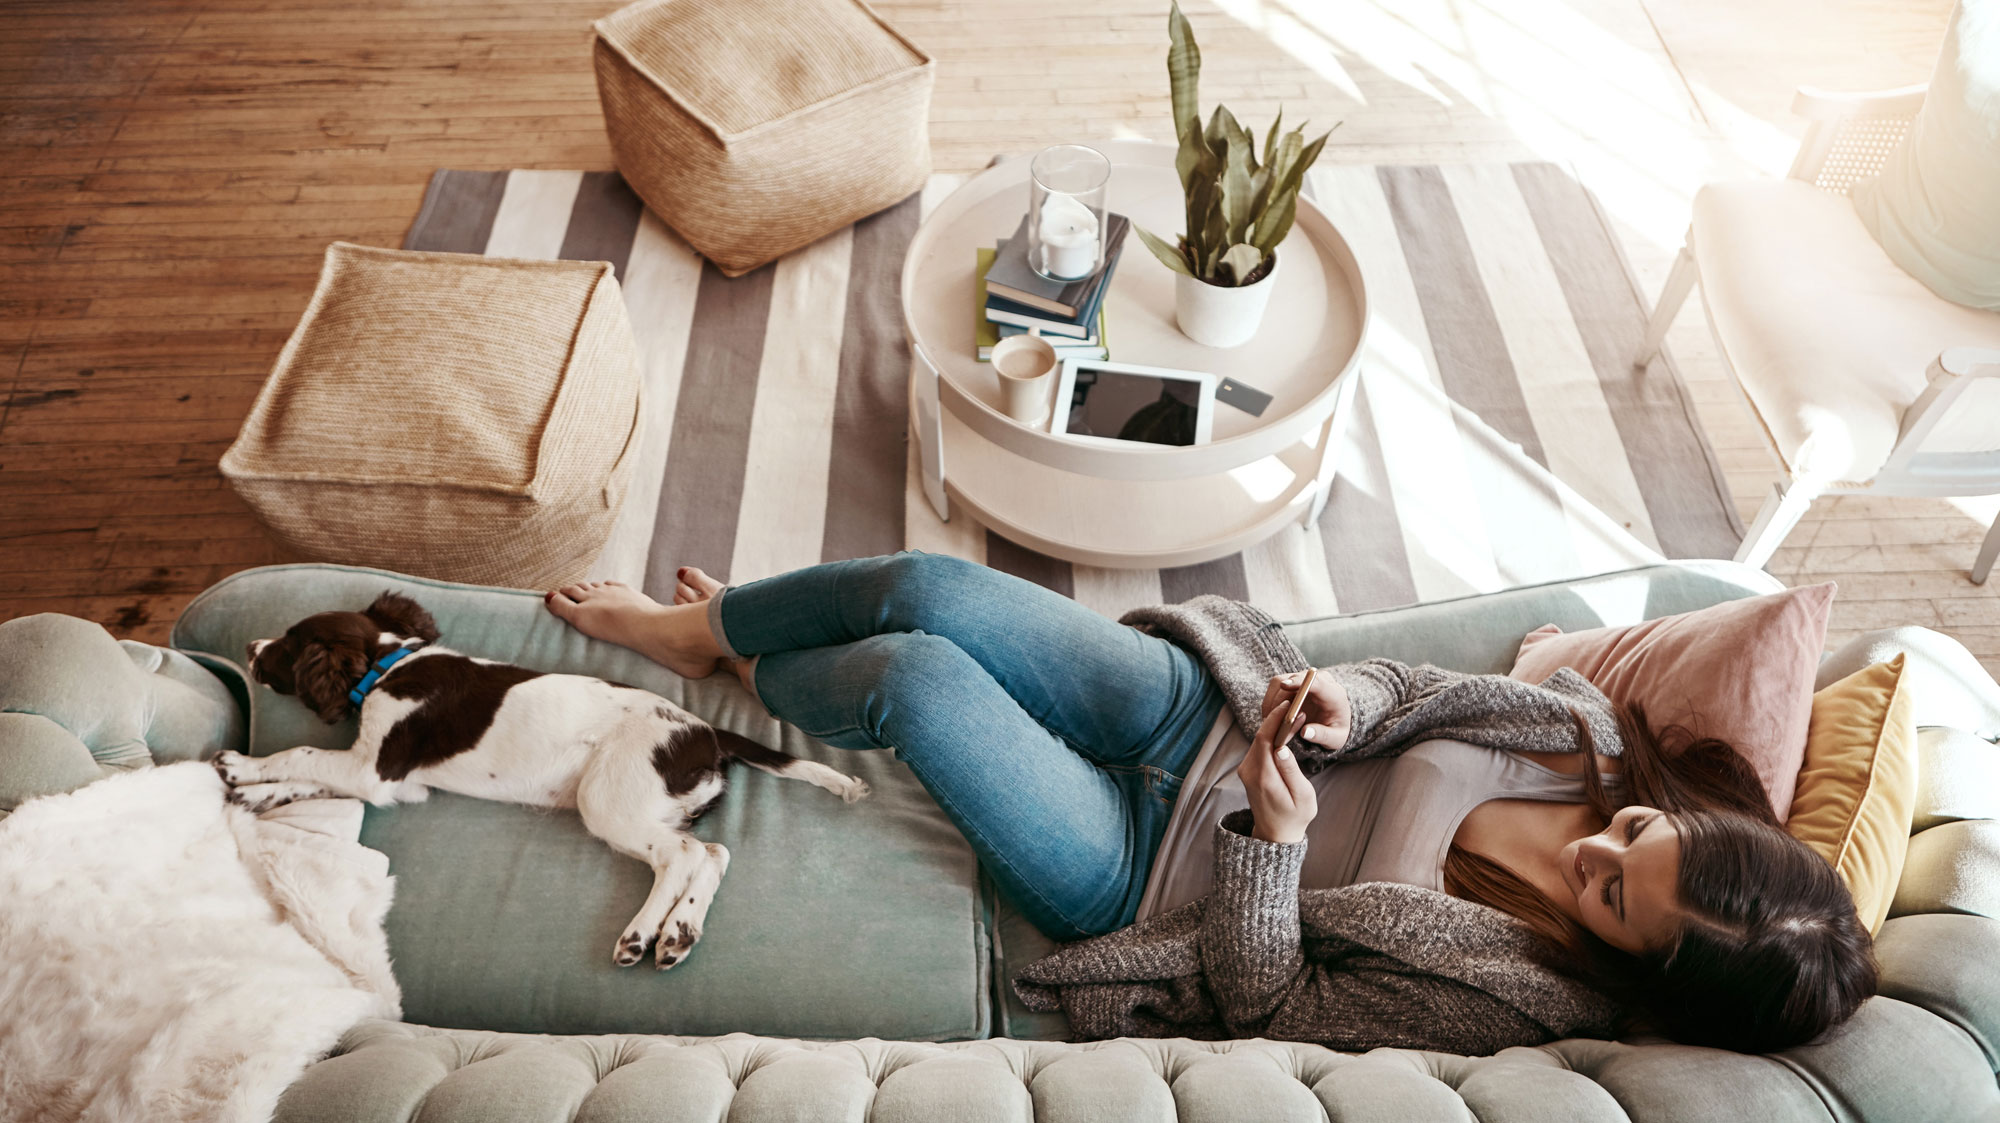 Young woman looking at her phone while laying on a couch with a dog